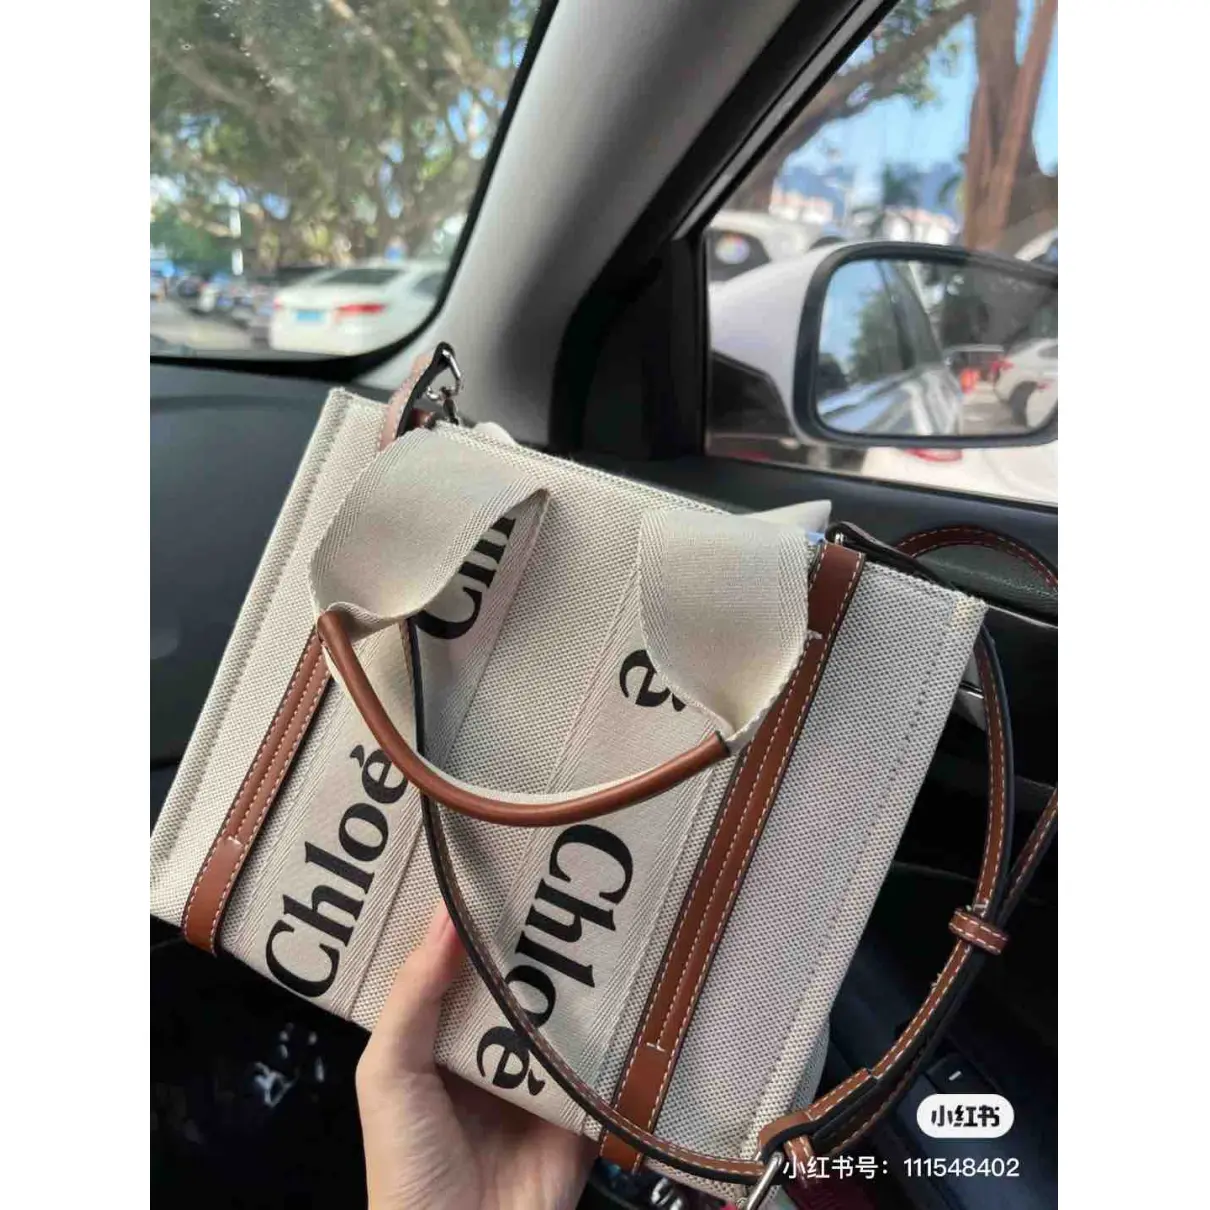 Buy Chloé Woody leather tote online